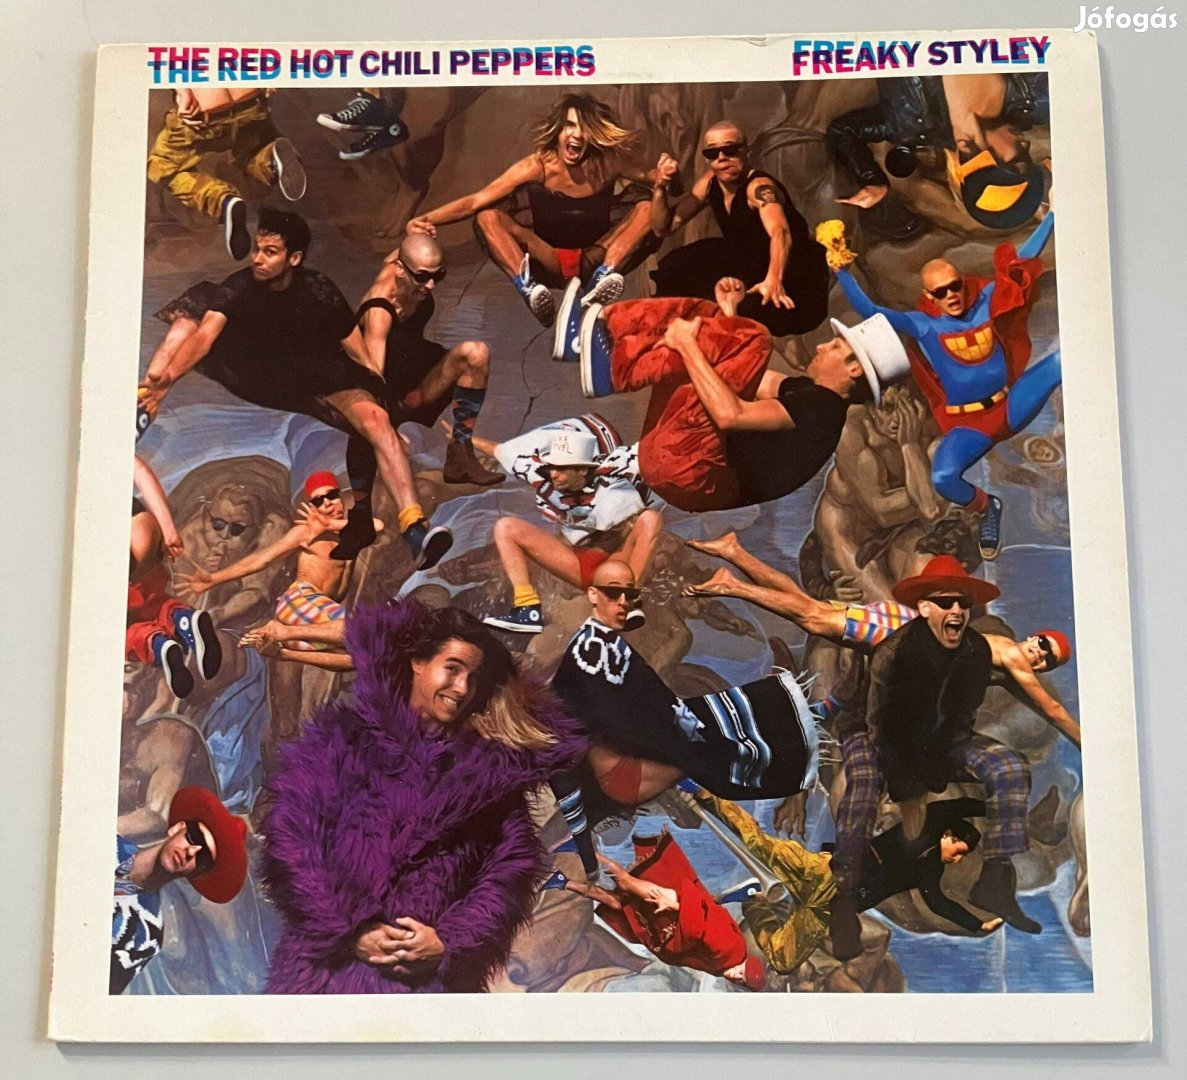 Red Hot Chili Peppers - Freaky Styley (német, 1985)